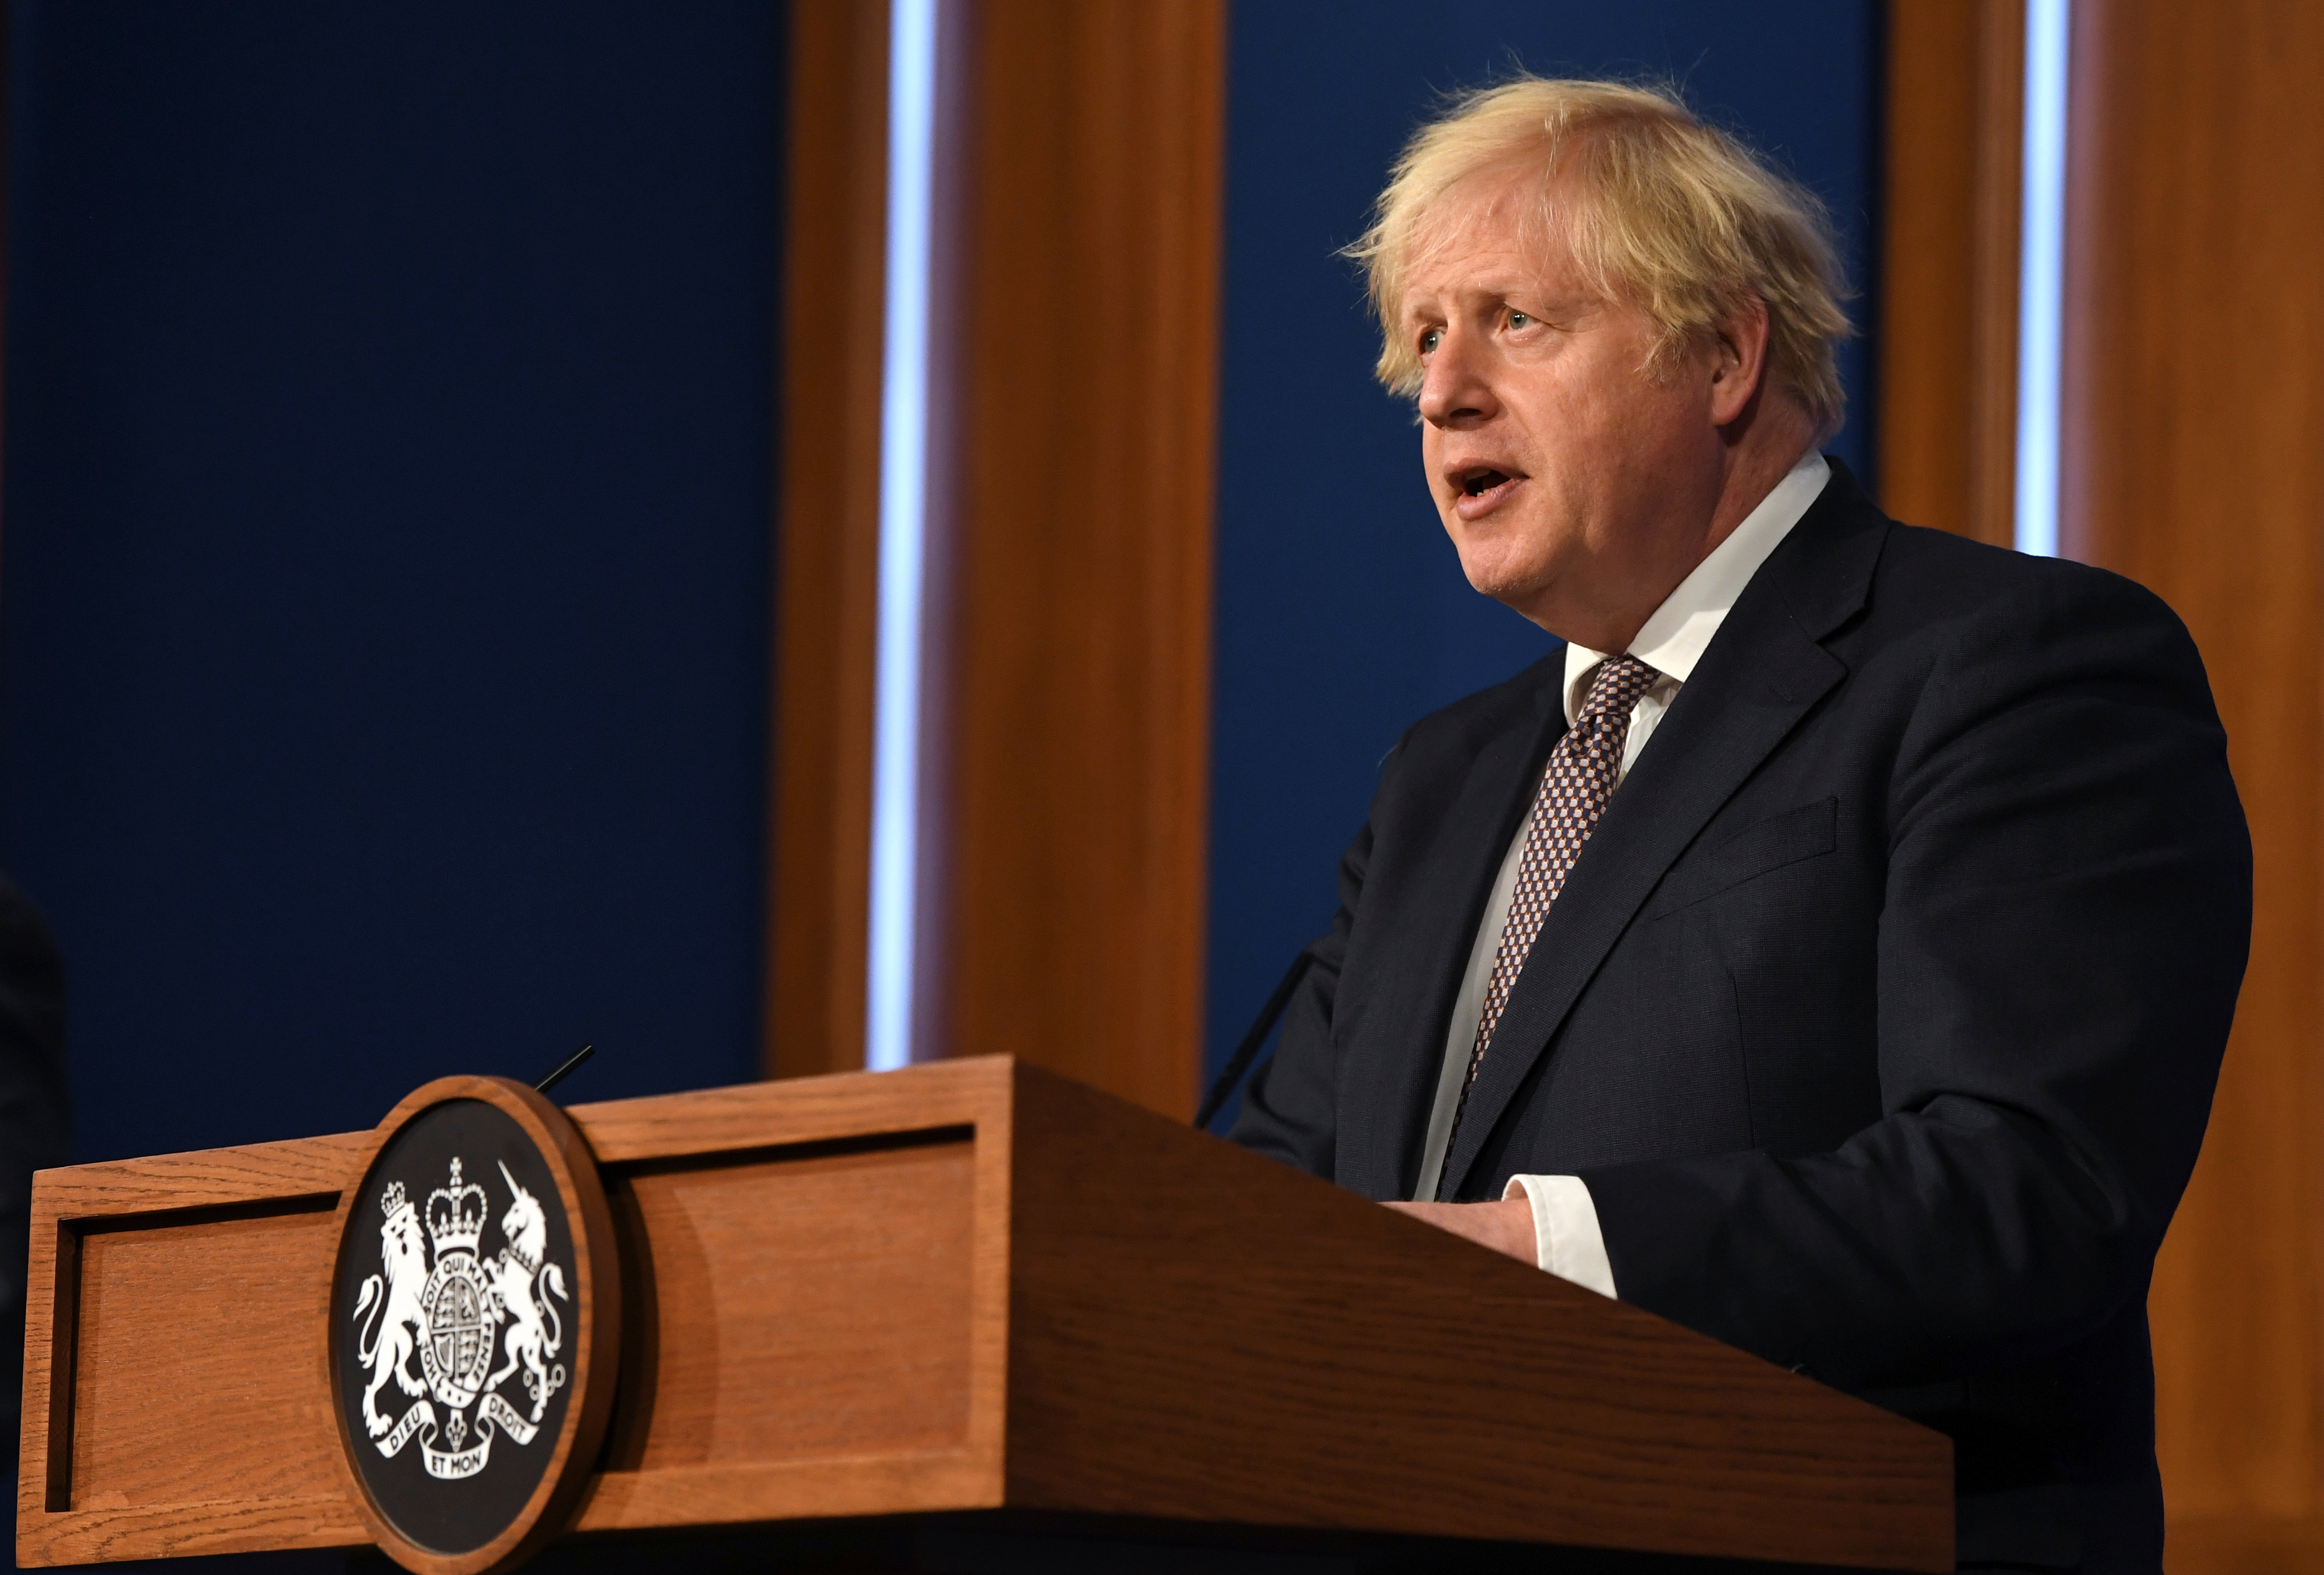 British Prime Minister Boris Johnson holds a news conference for England's COVID-19 lockdown easing announcement in London